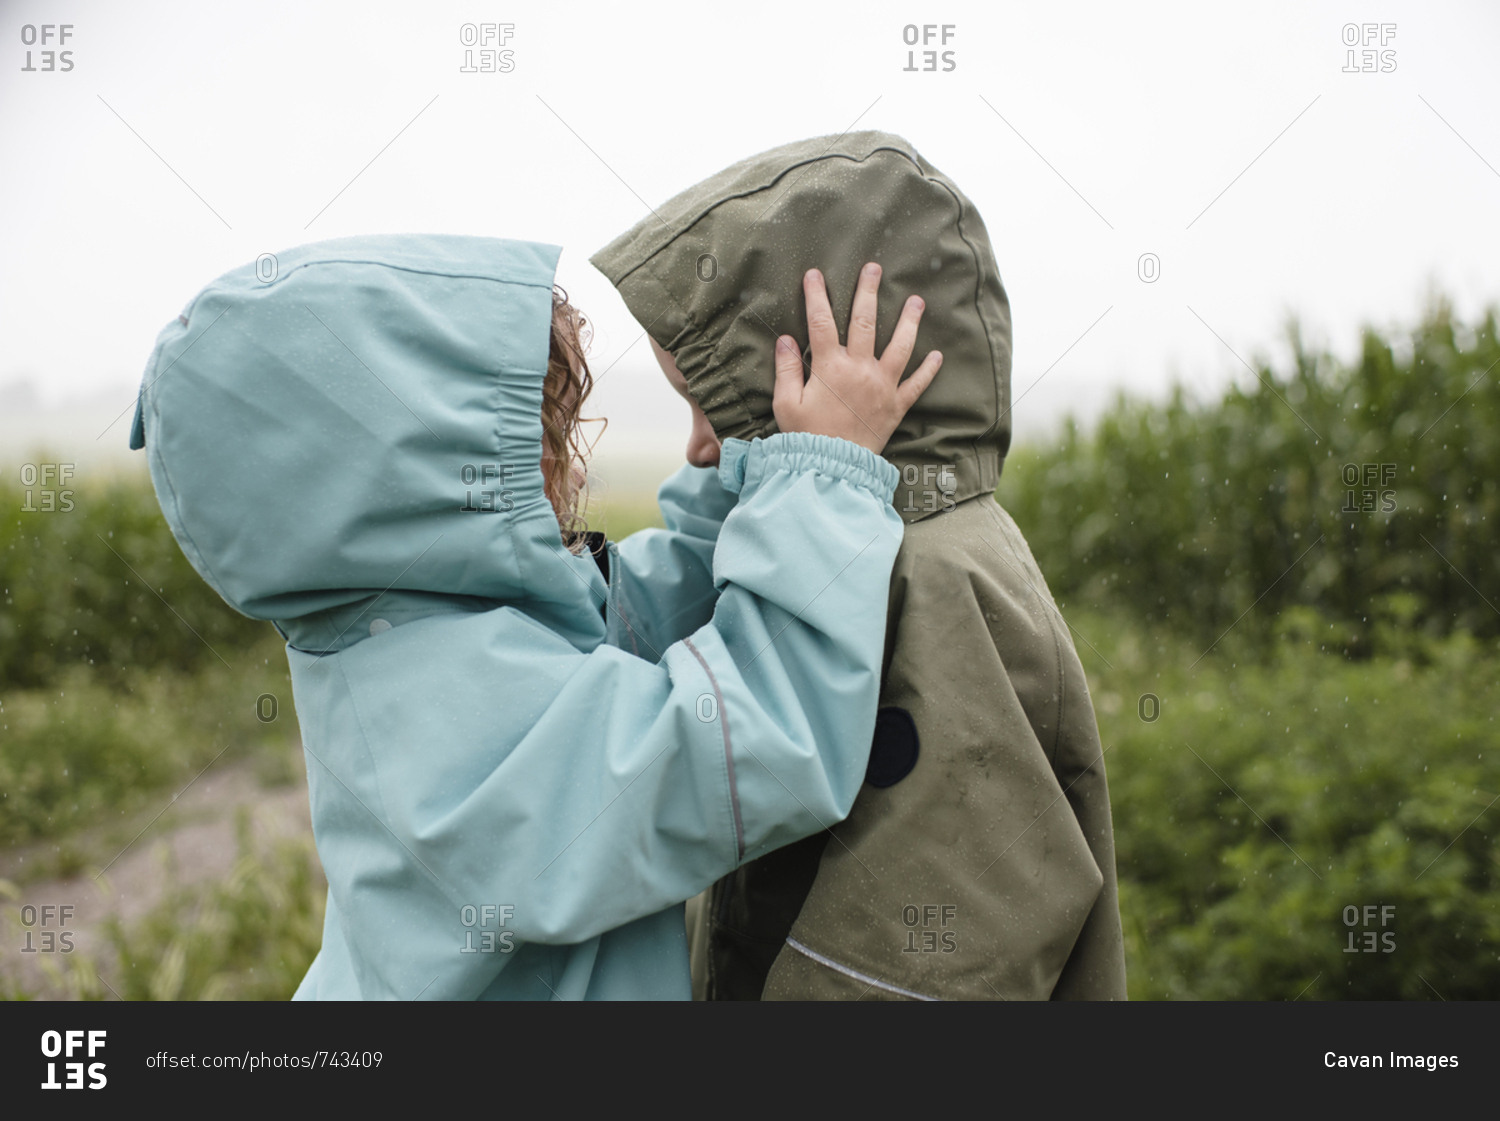 Side view of siblings in raincoats looking at each other while standing against plants during rainy season